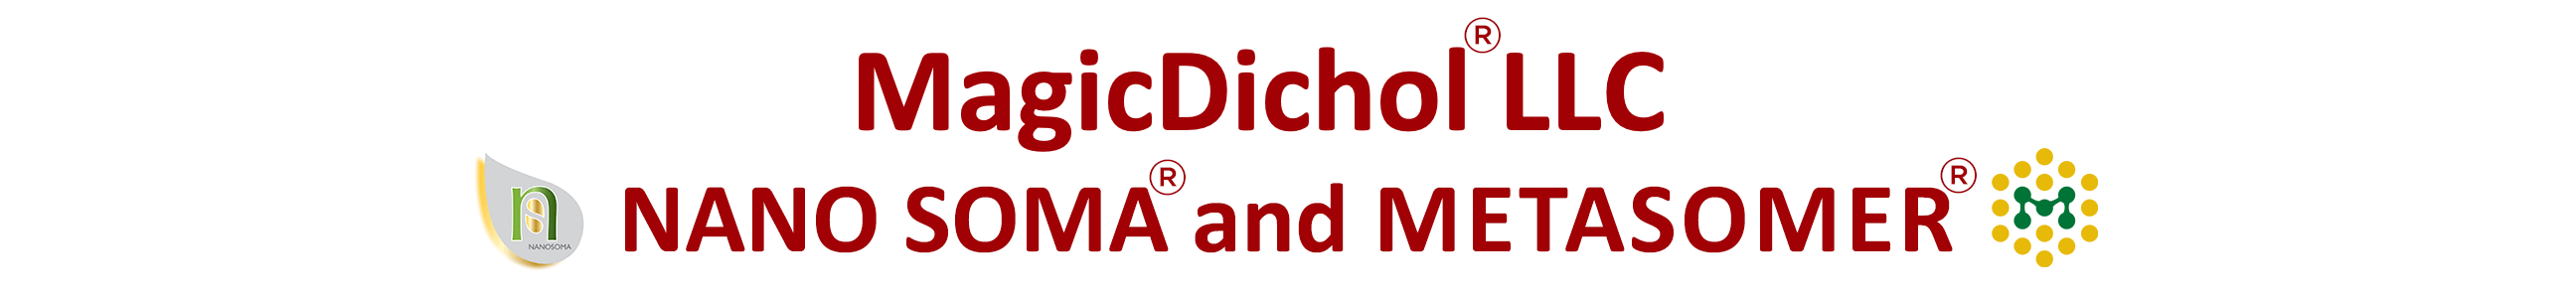 The MagicDichol Family of Products